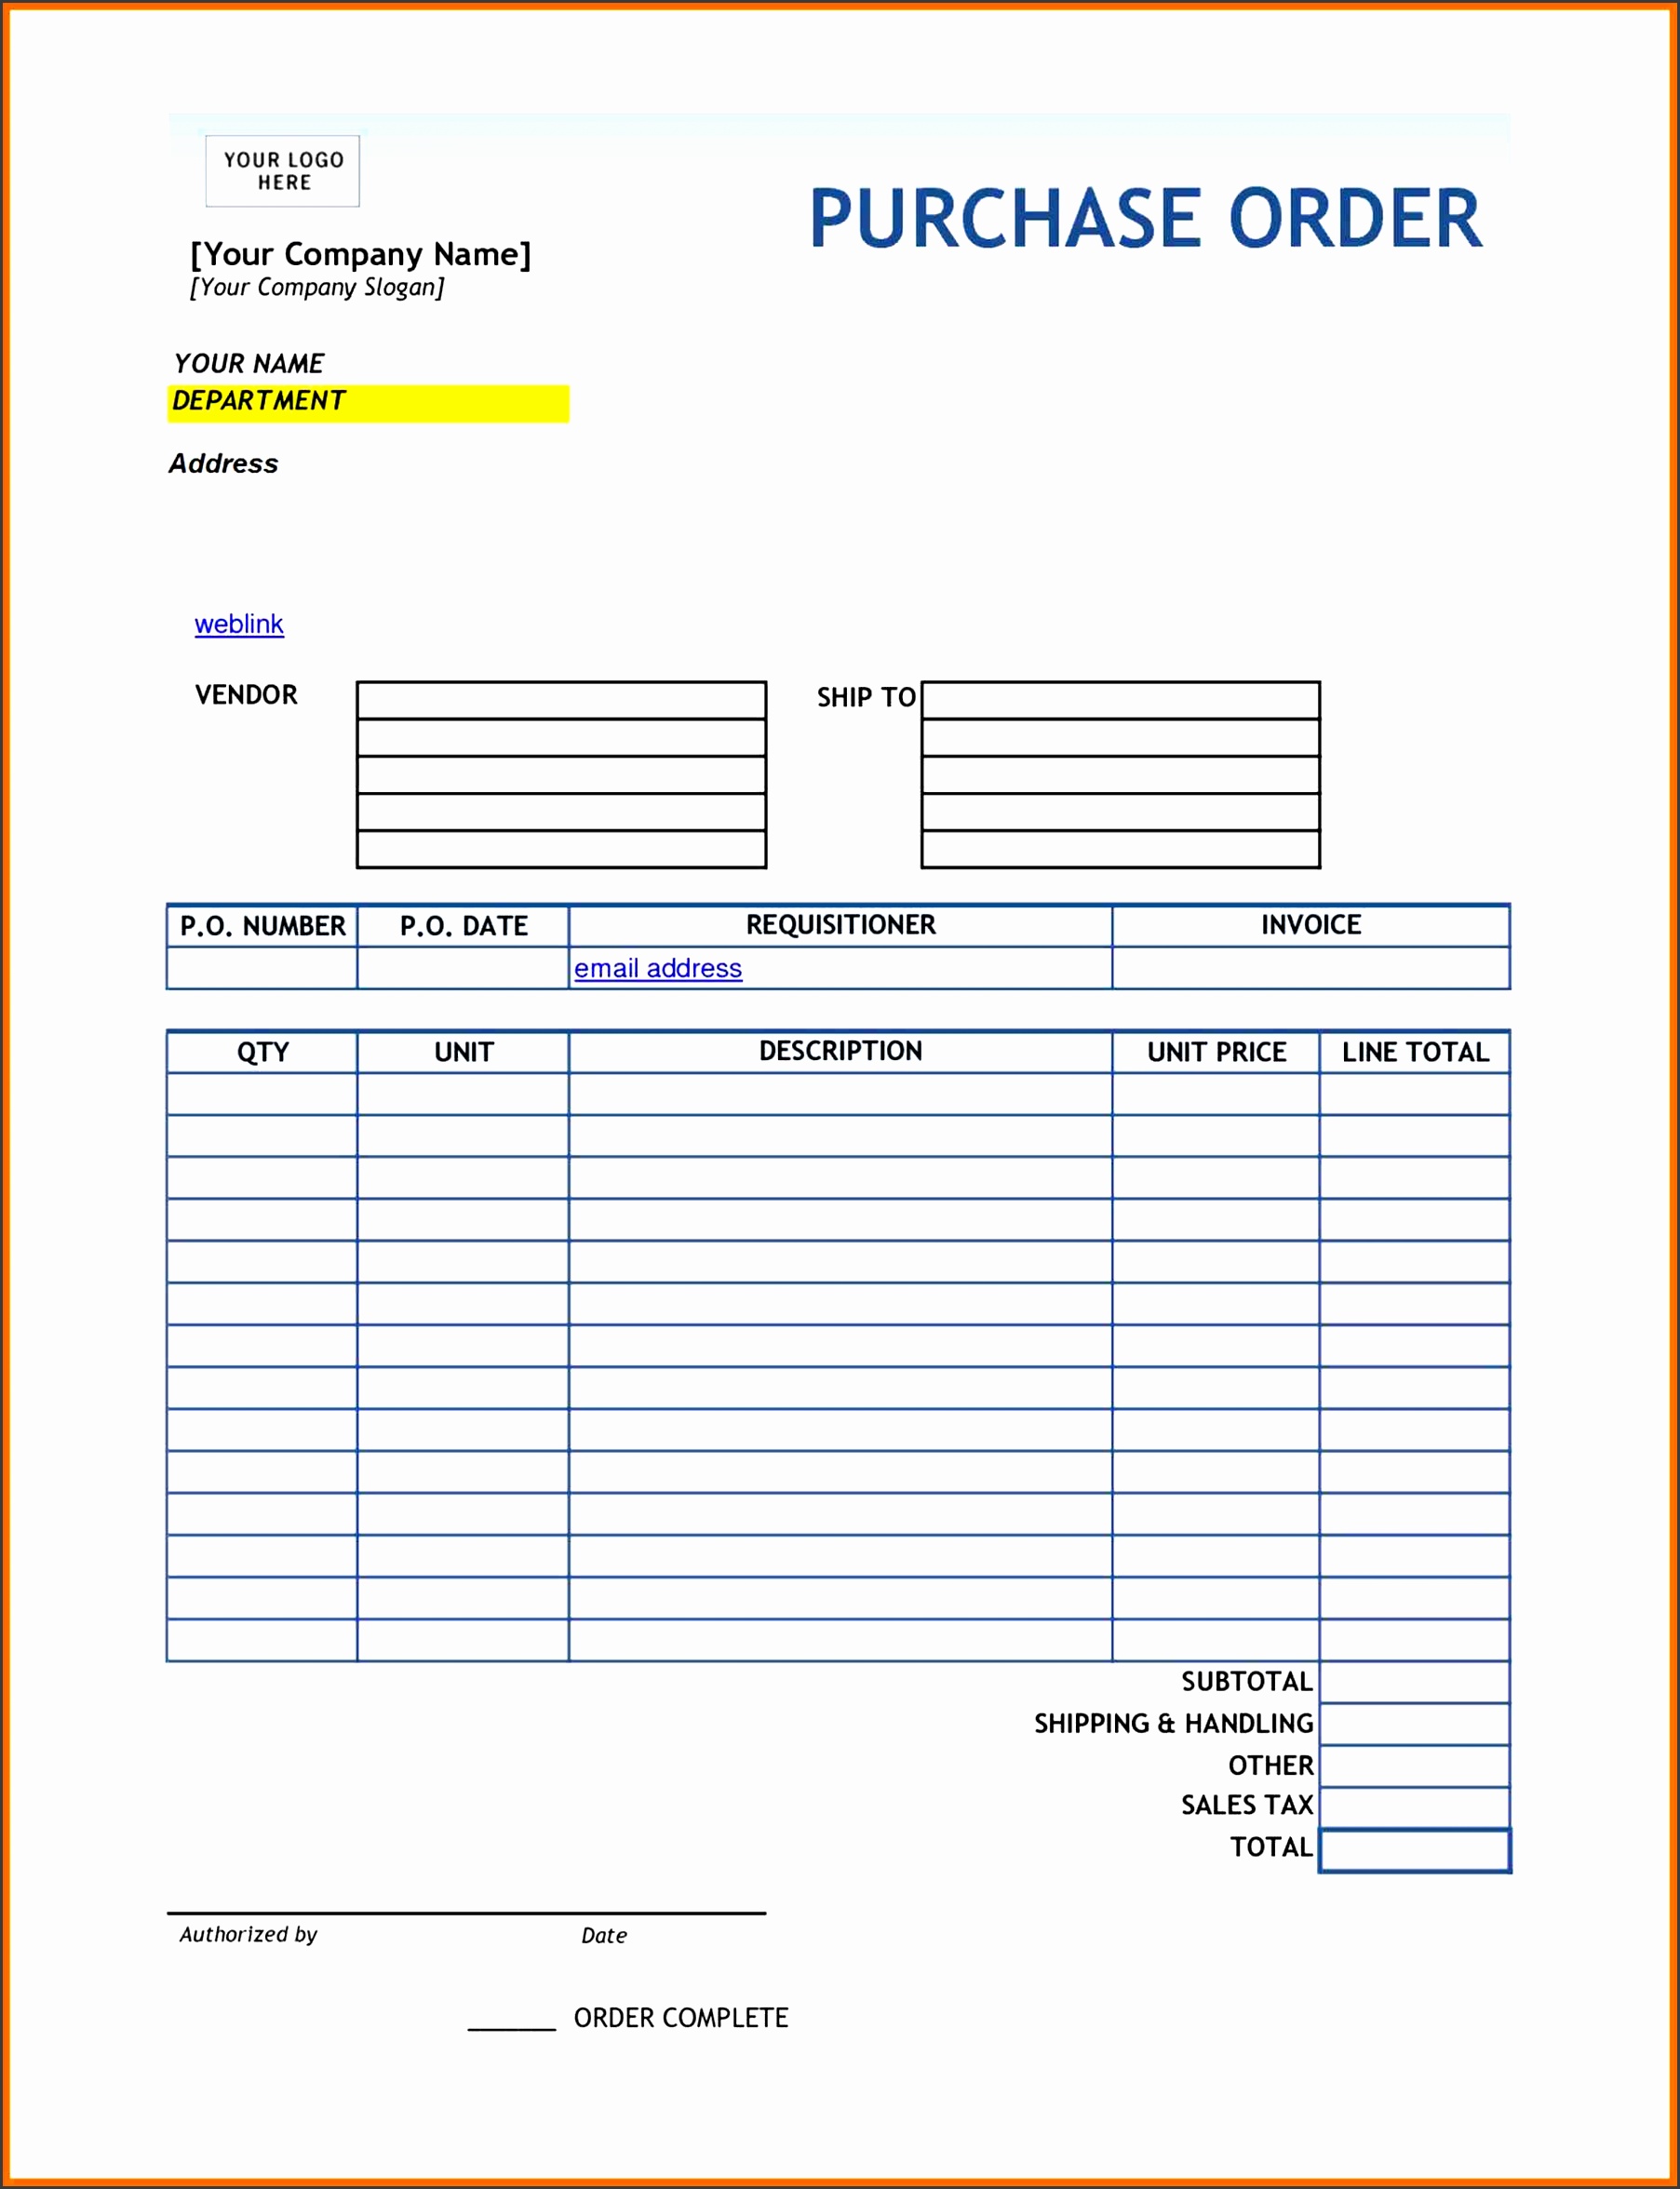 excel social ebuzz itinerary sample purchase blank purchase order form template order template excel itinerary sample